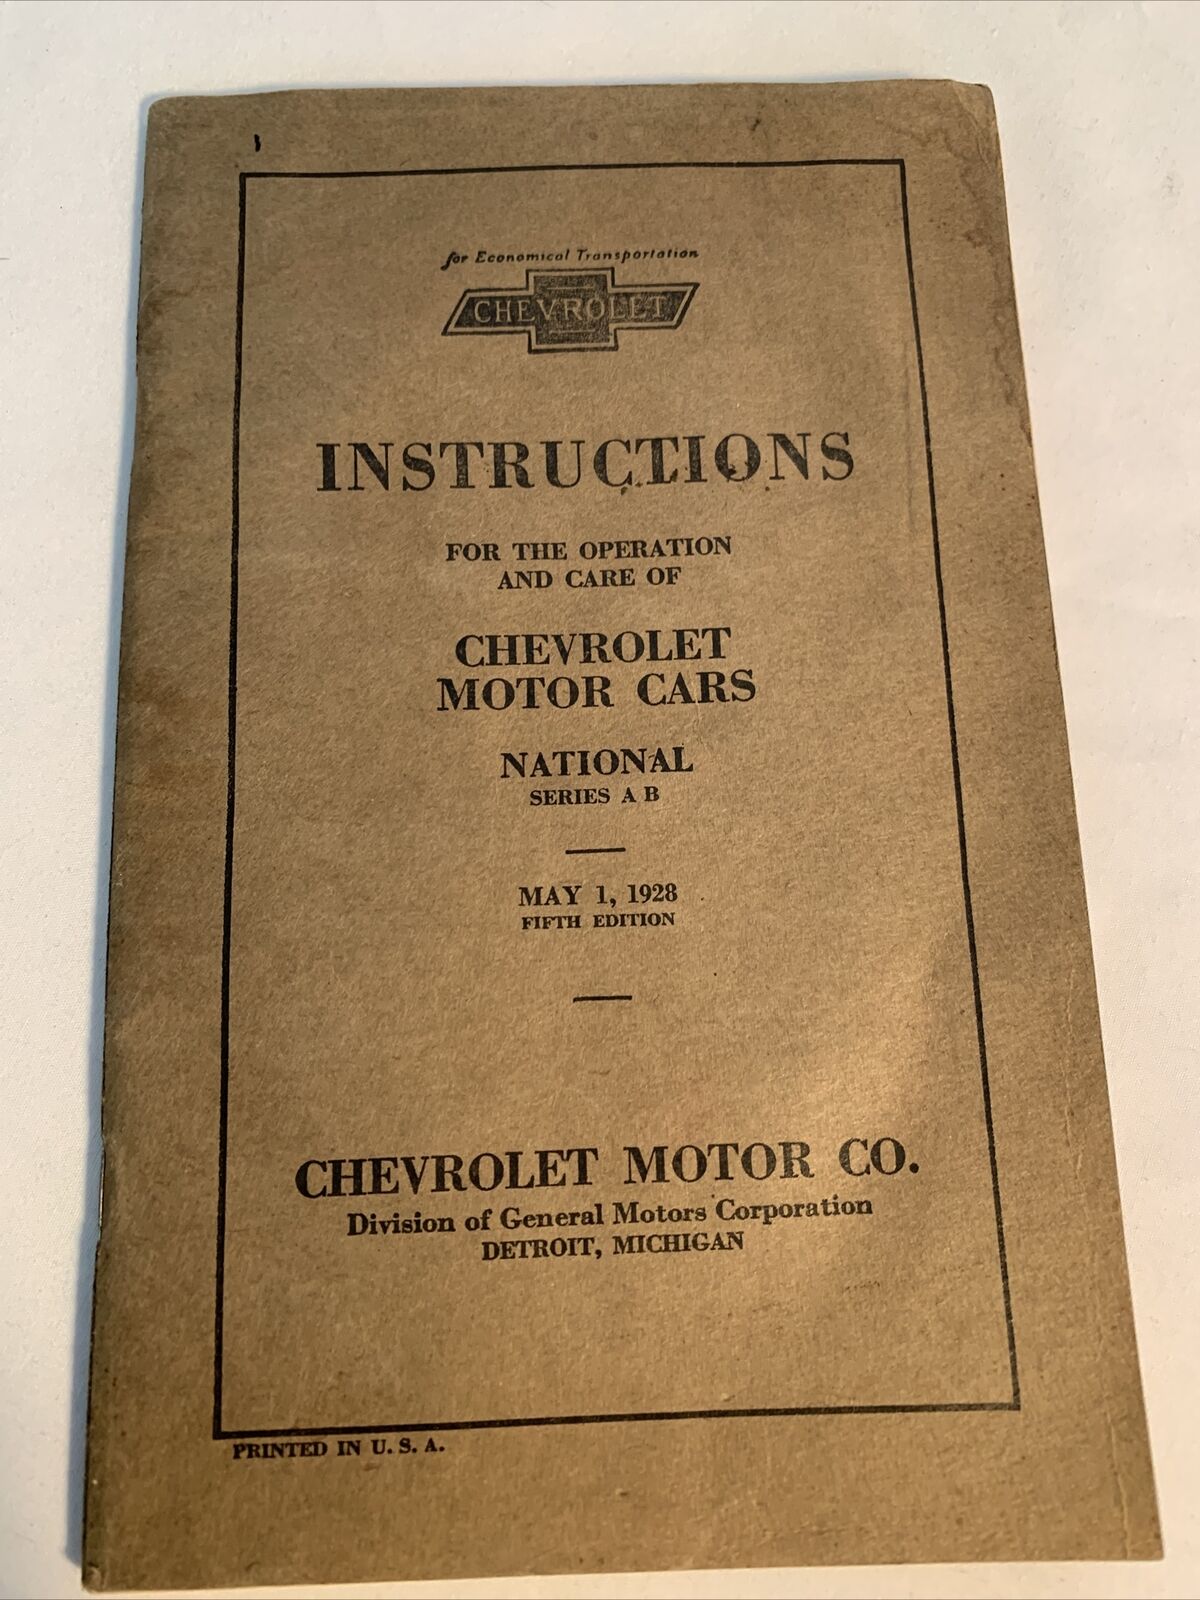 1928 Instructions For The Operation And Care Of Chevrolet Motor Cars 